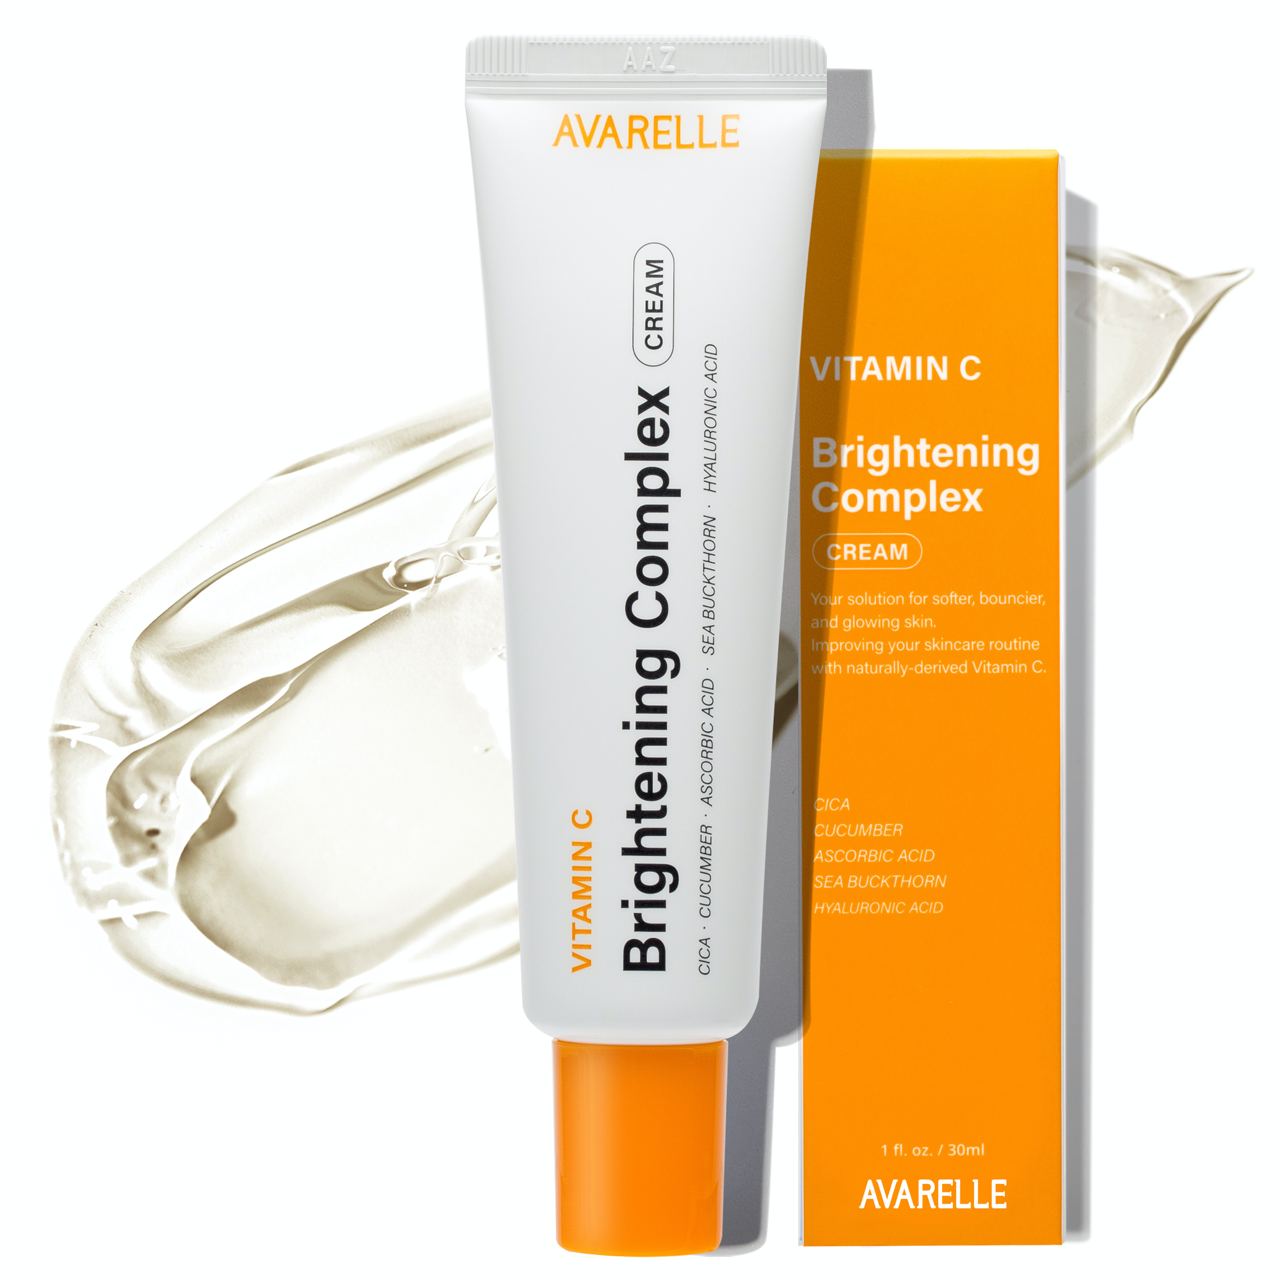 Avarelle's Vitamin C Brightening Complex Cream with packaging and a swatch of the product. WIth key ingredients such as, Cica, Cucumber, Ascorbic Acid, Sea Buckthorn (Naturally- derived Vitamin C), Hyaluronic Acid